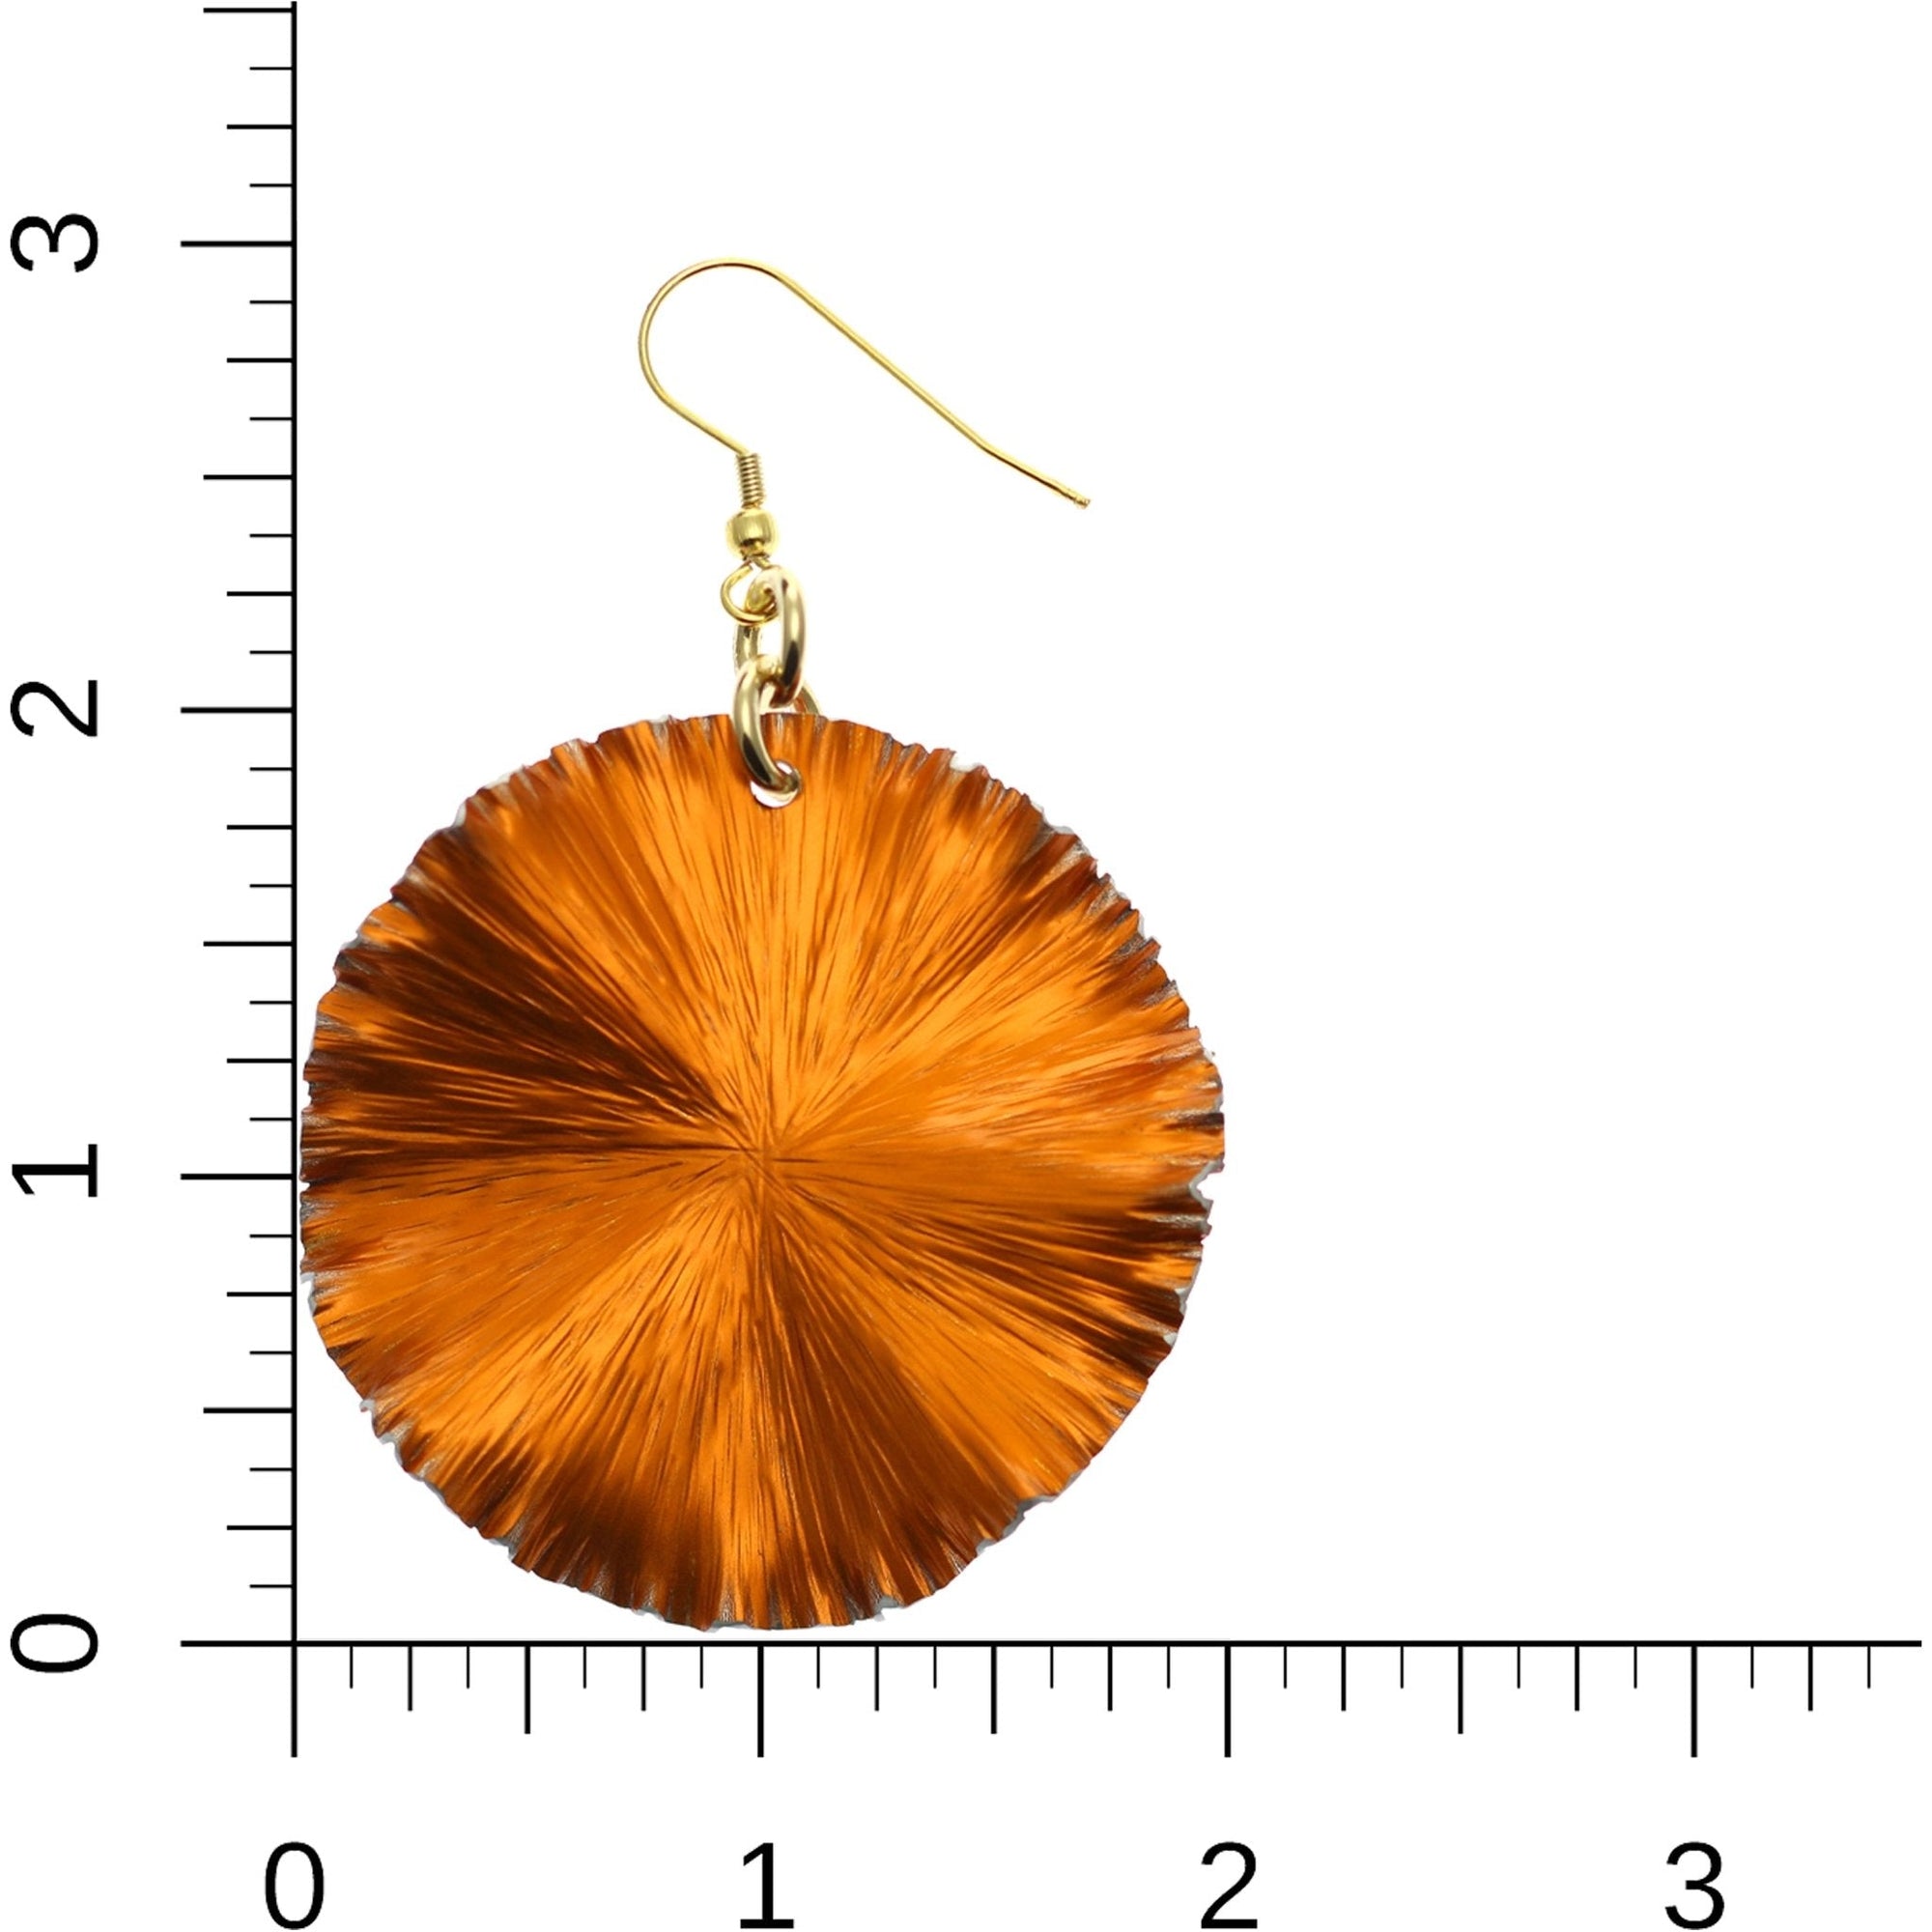 Scale of Orange Anodized Aluminum Lily Pad Earrings